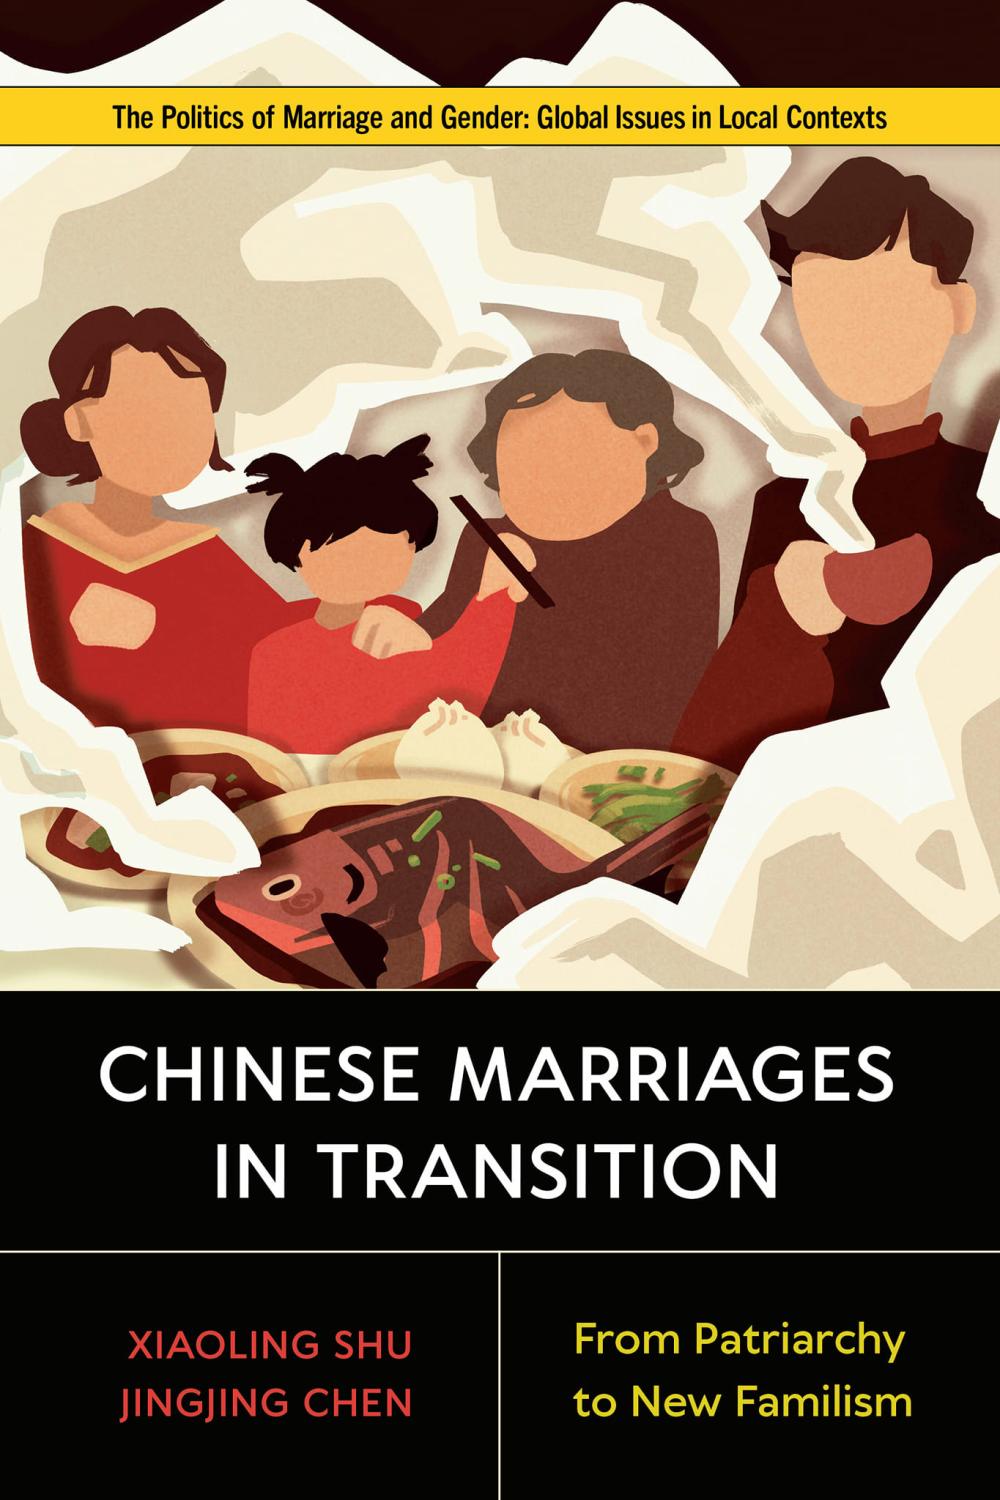 Chinese marriages